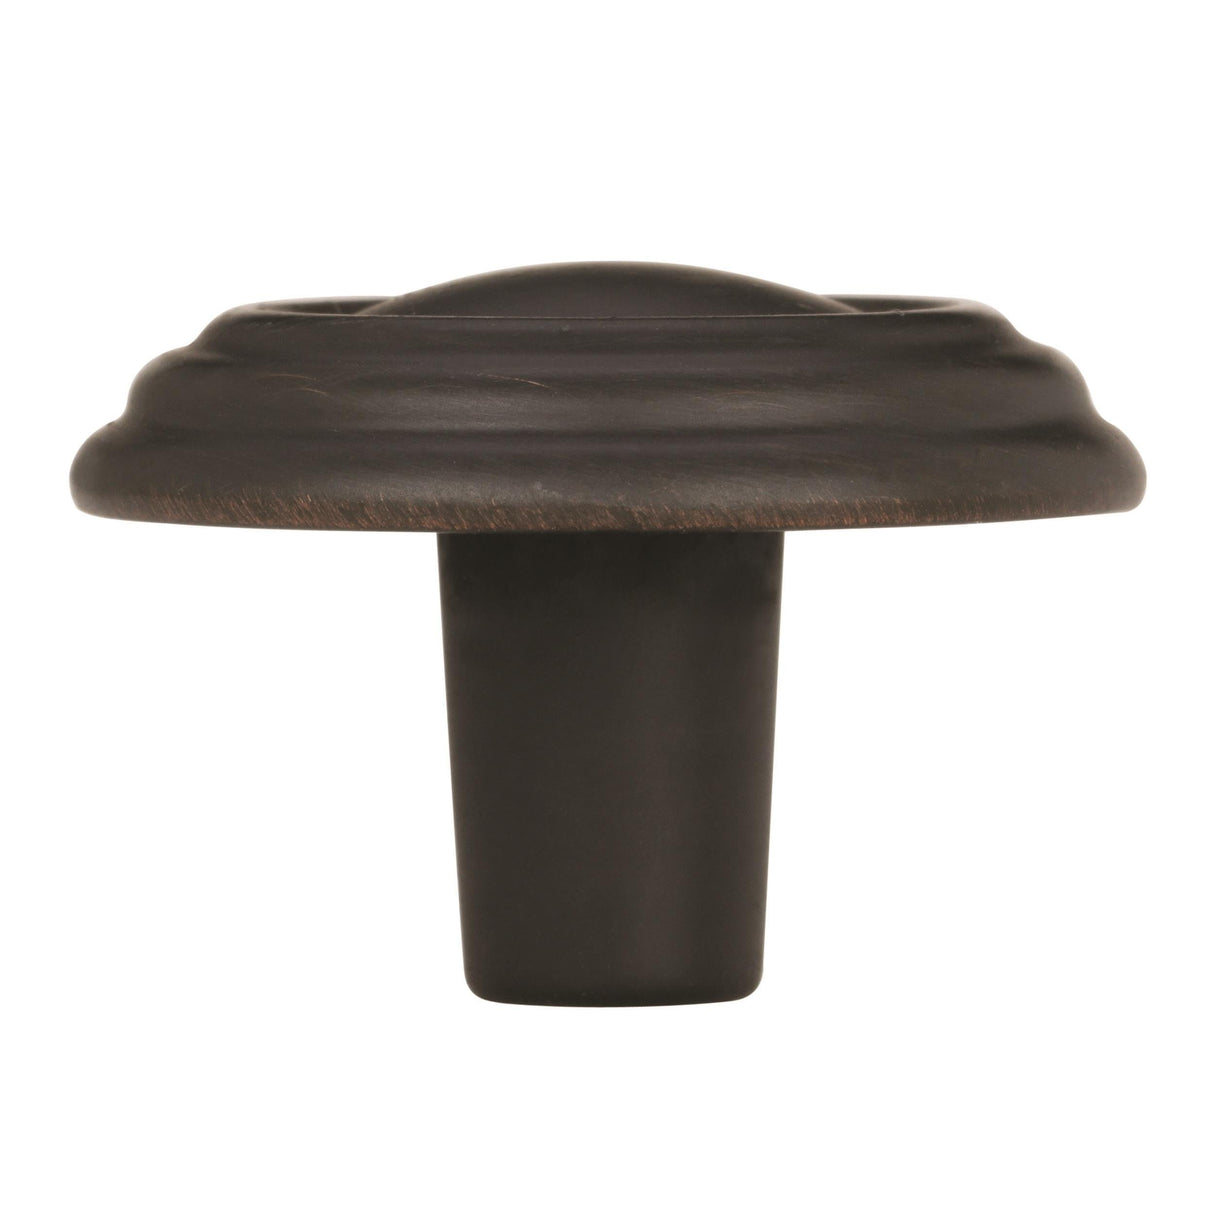 Amerock Cabinet Knob Oil Rubbed Bronze 1-1/4 inch (32 mm) Diameter Sterling Traditions 1 Pack Drawer Knob Cabinet Hardware